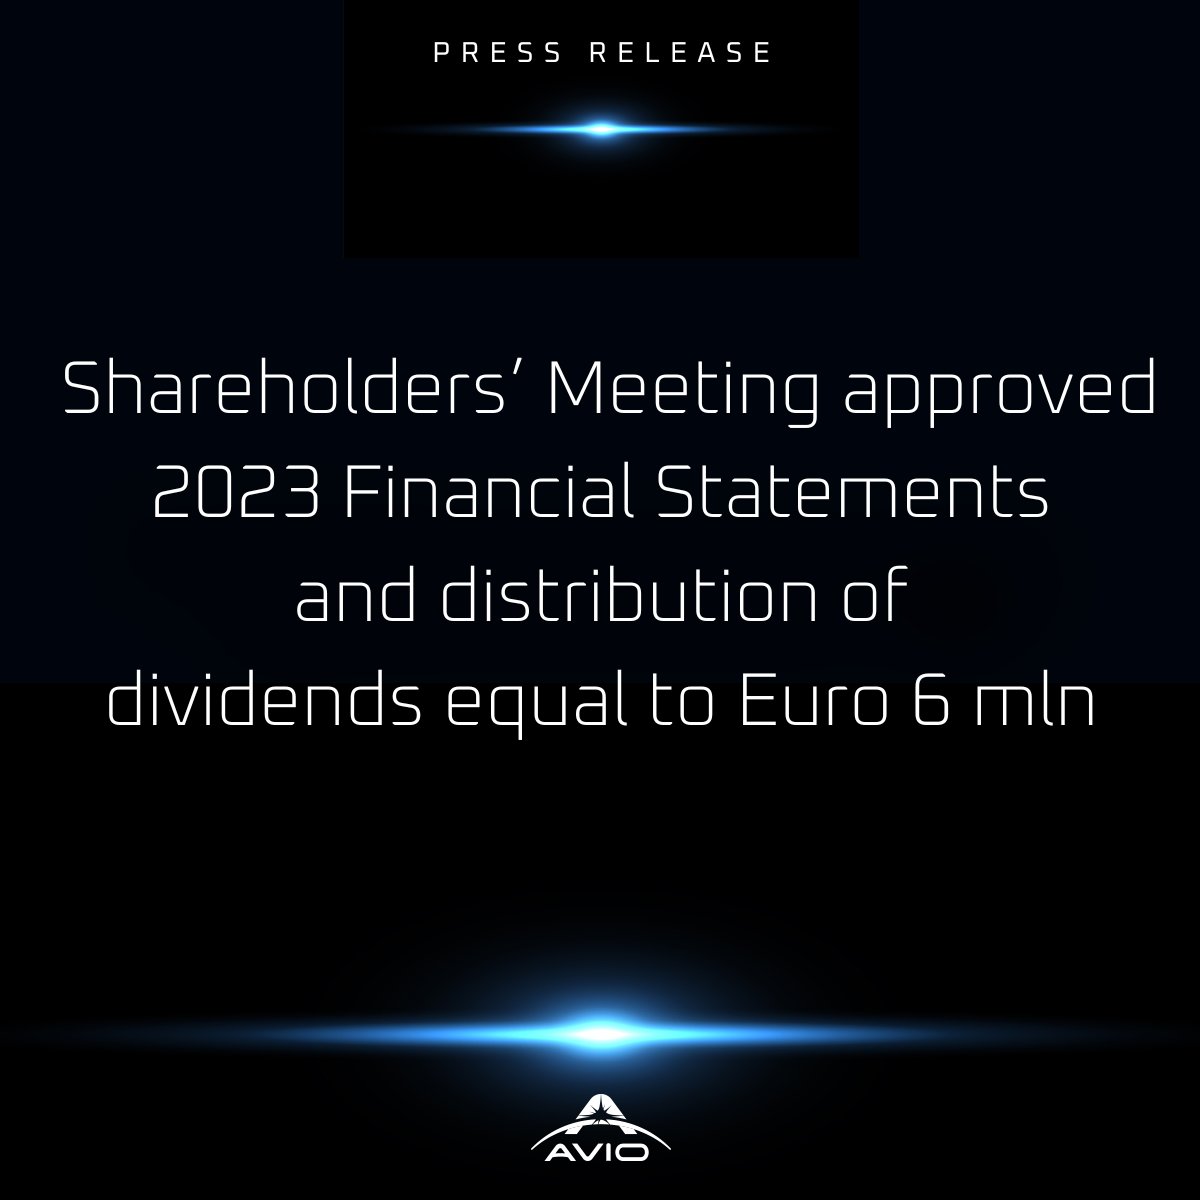 The ordinary Shareholders’ Meeting of #Avio S.p.A. was held today under the chairmanship of Mr. Roberto Italia. Read the press release to discover all the Shareholders’ Meeting resolutions: bit.ly/449r3P7 #space